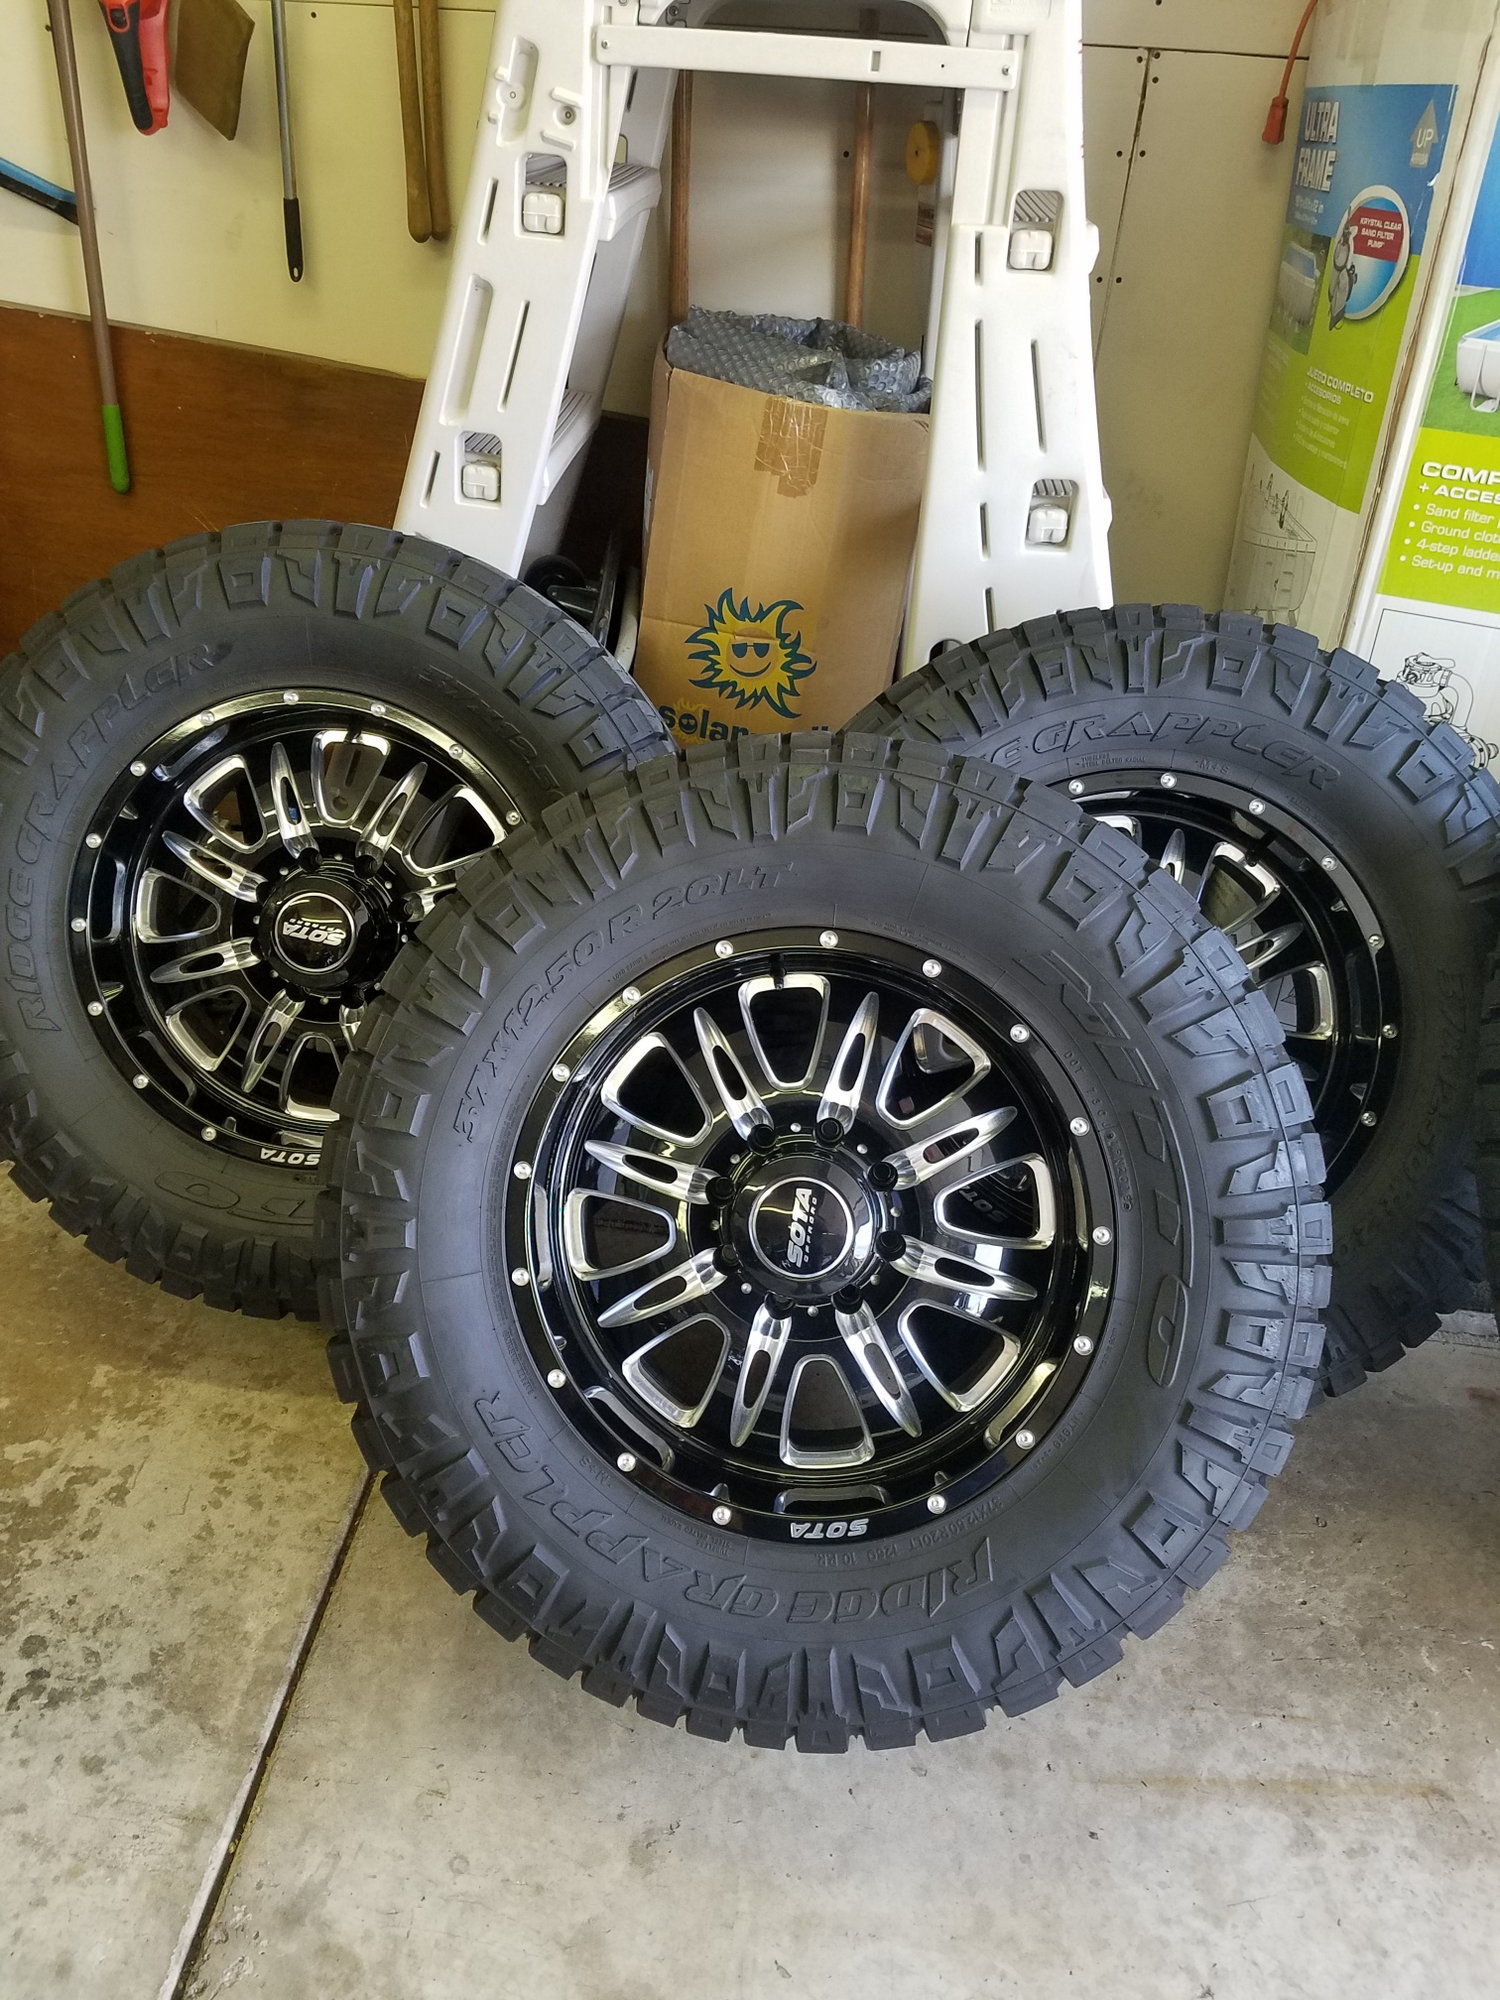 Wheels and Tires/Axles - SOTA rehab 20" wheels and Nitto 37x12.50 tire package - Used - 2011 to 2019 Ford F-250 Super Duty - 2011 to 2019 Ford F-350 Super Duty - Livonia, MI 48150, United States